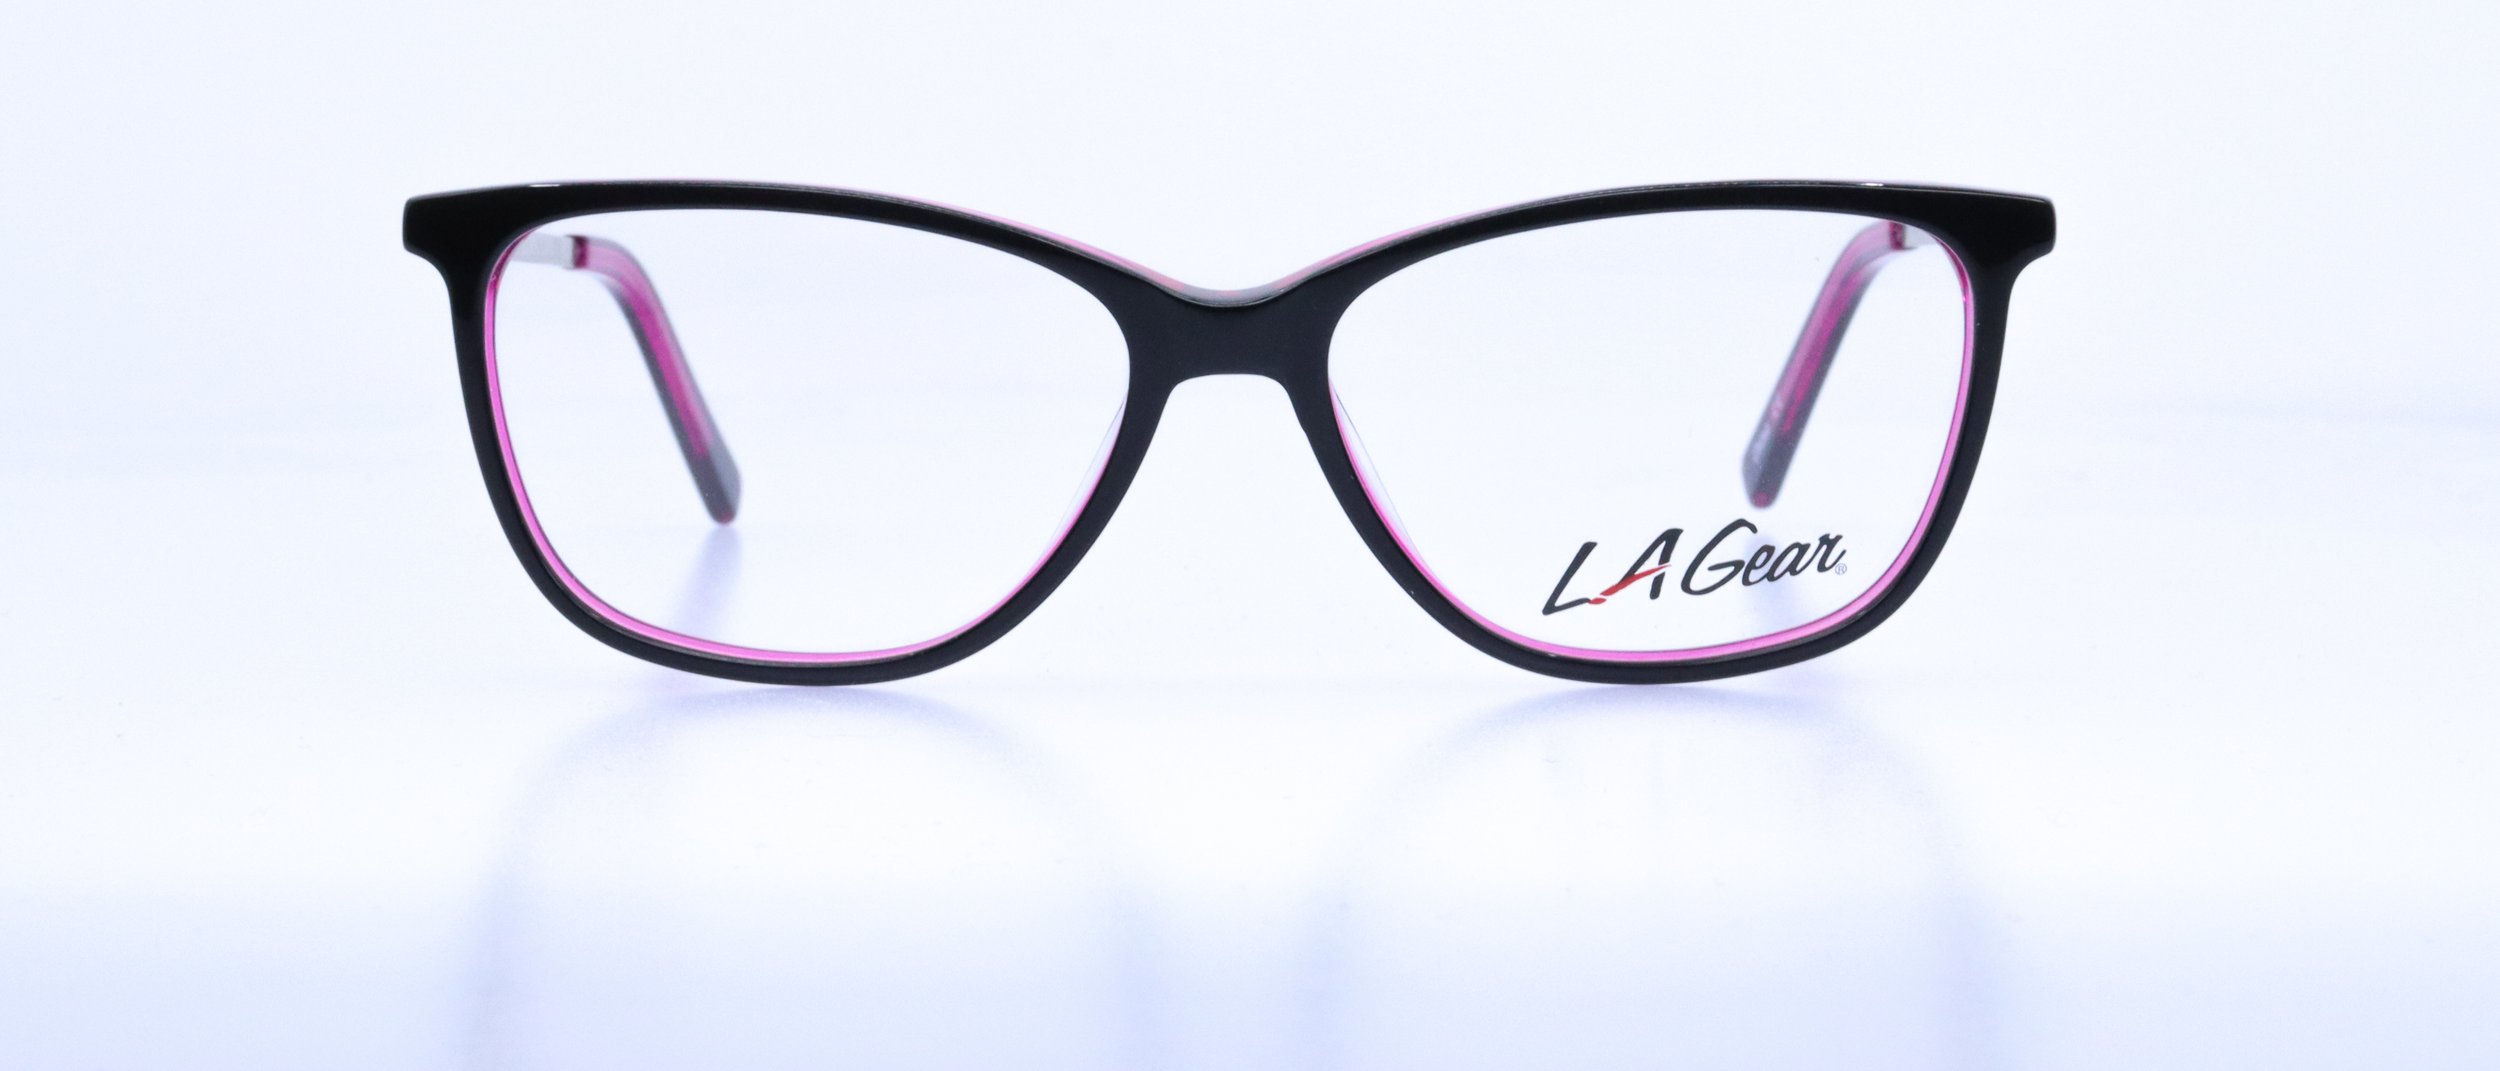  Downtown: 53-15-135, Available in Plum or Tortoise/Brown 